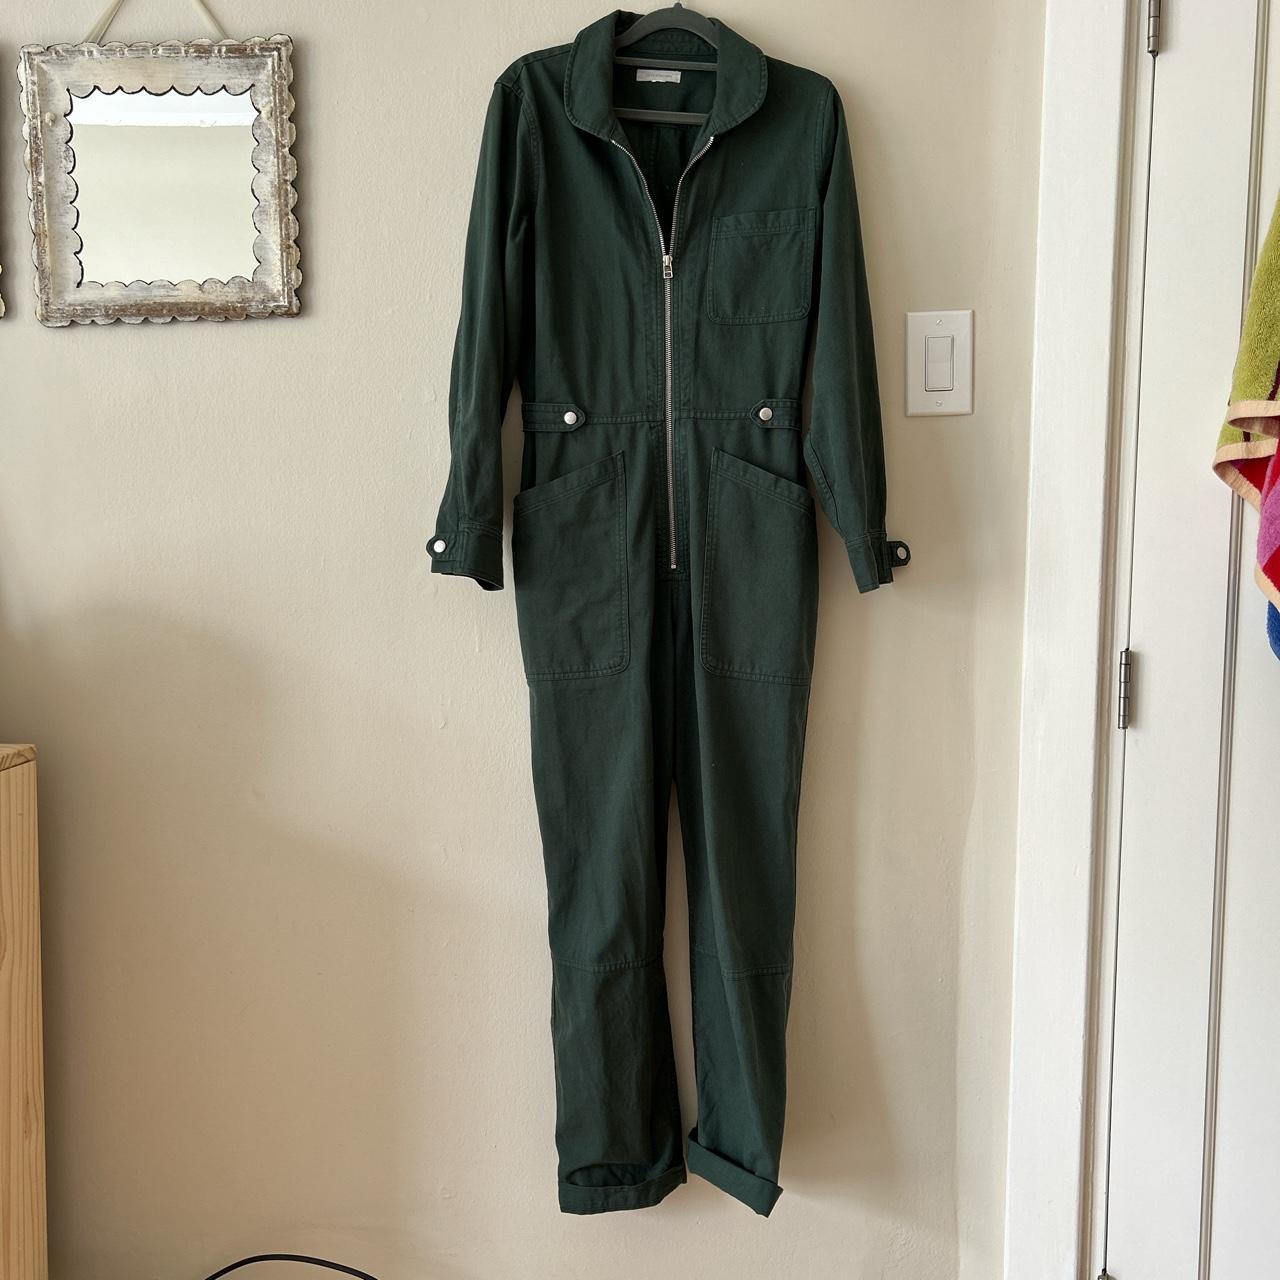 Outerknown jumpsuit. Hunter green. So comfortable - Depop